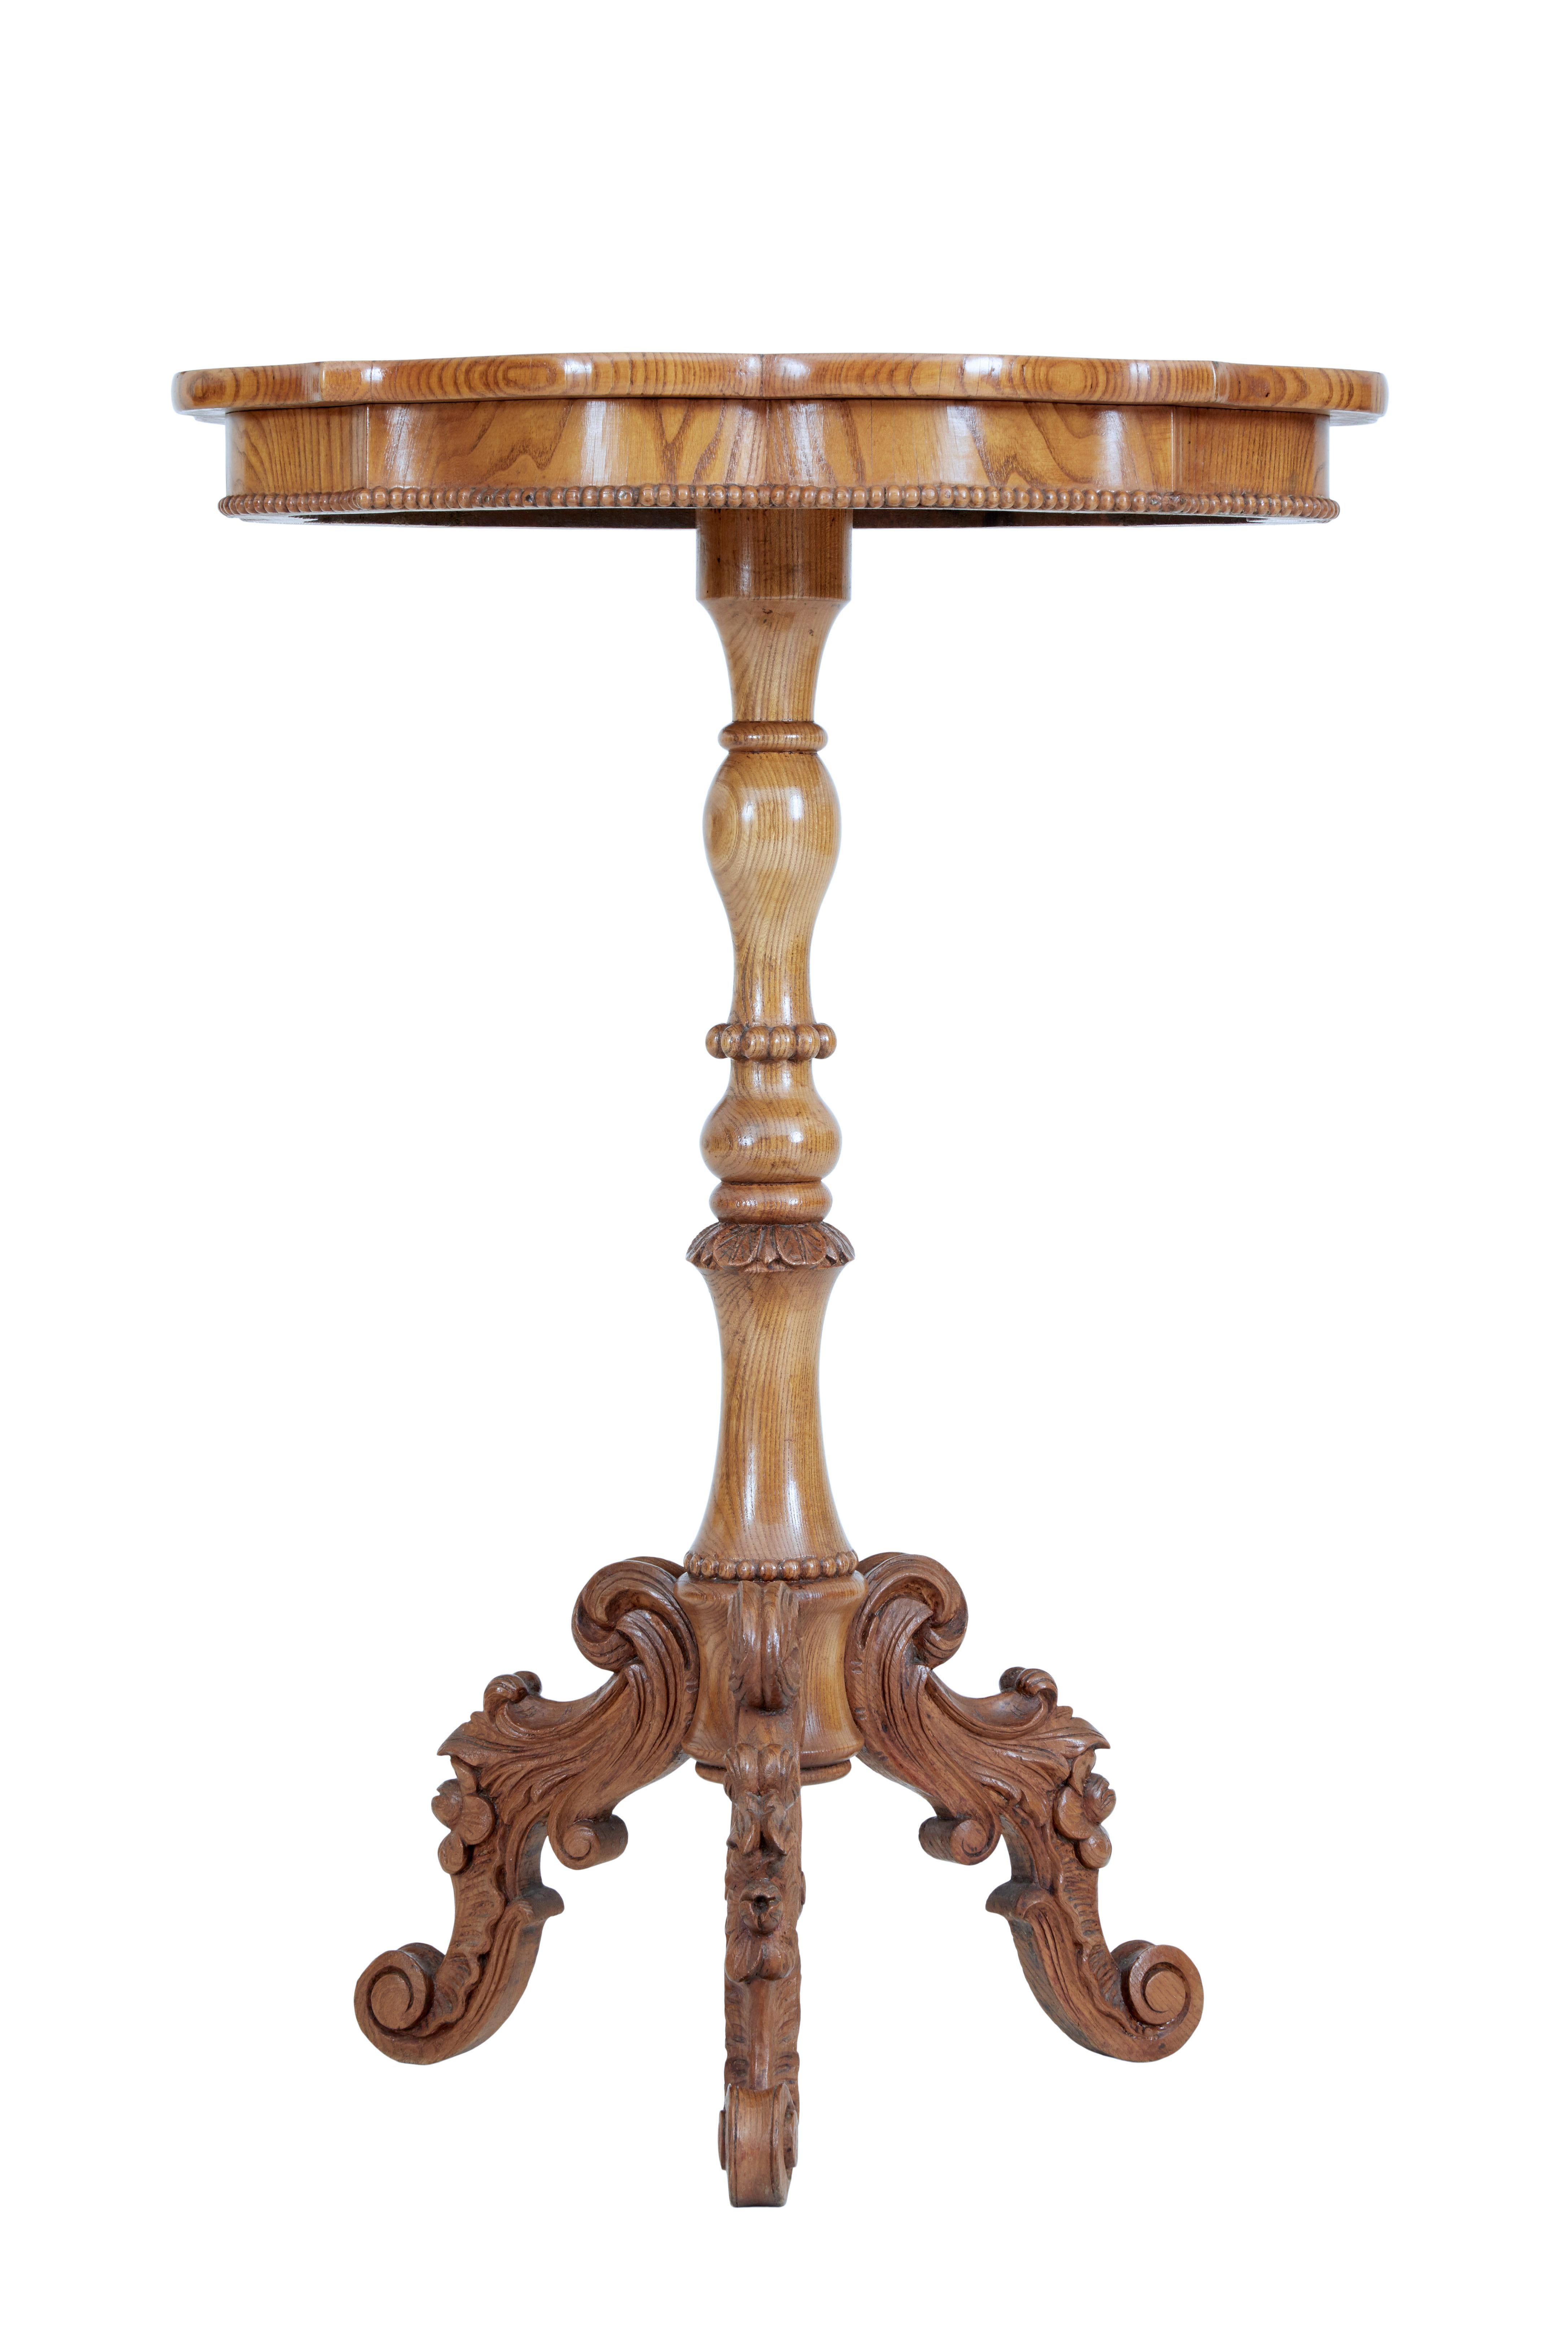 19th century Swedish elm shaped occasional table, circa 1870.

Good quality shaped top occasional table. Top veneered in matched elm and detailed with beaded edge below the frieze. Standing on a turned a carved stem, with 3 carved scrolled